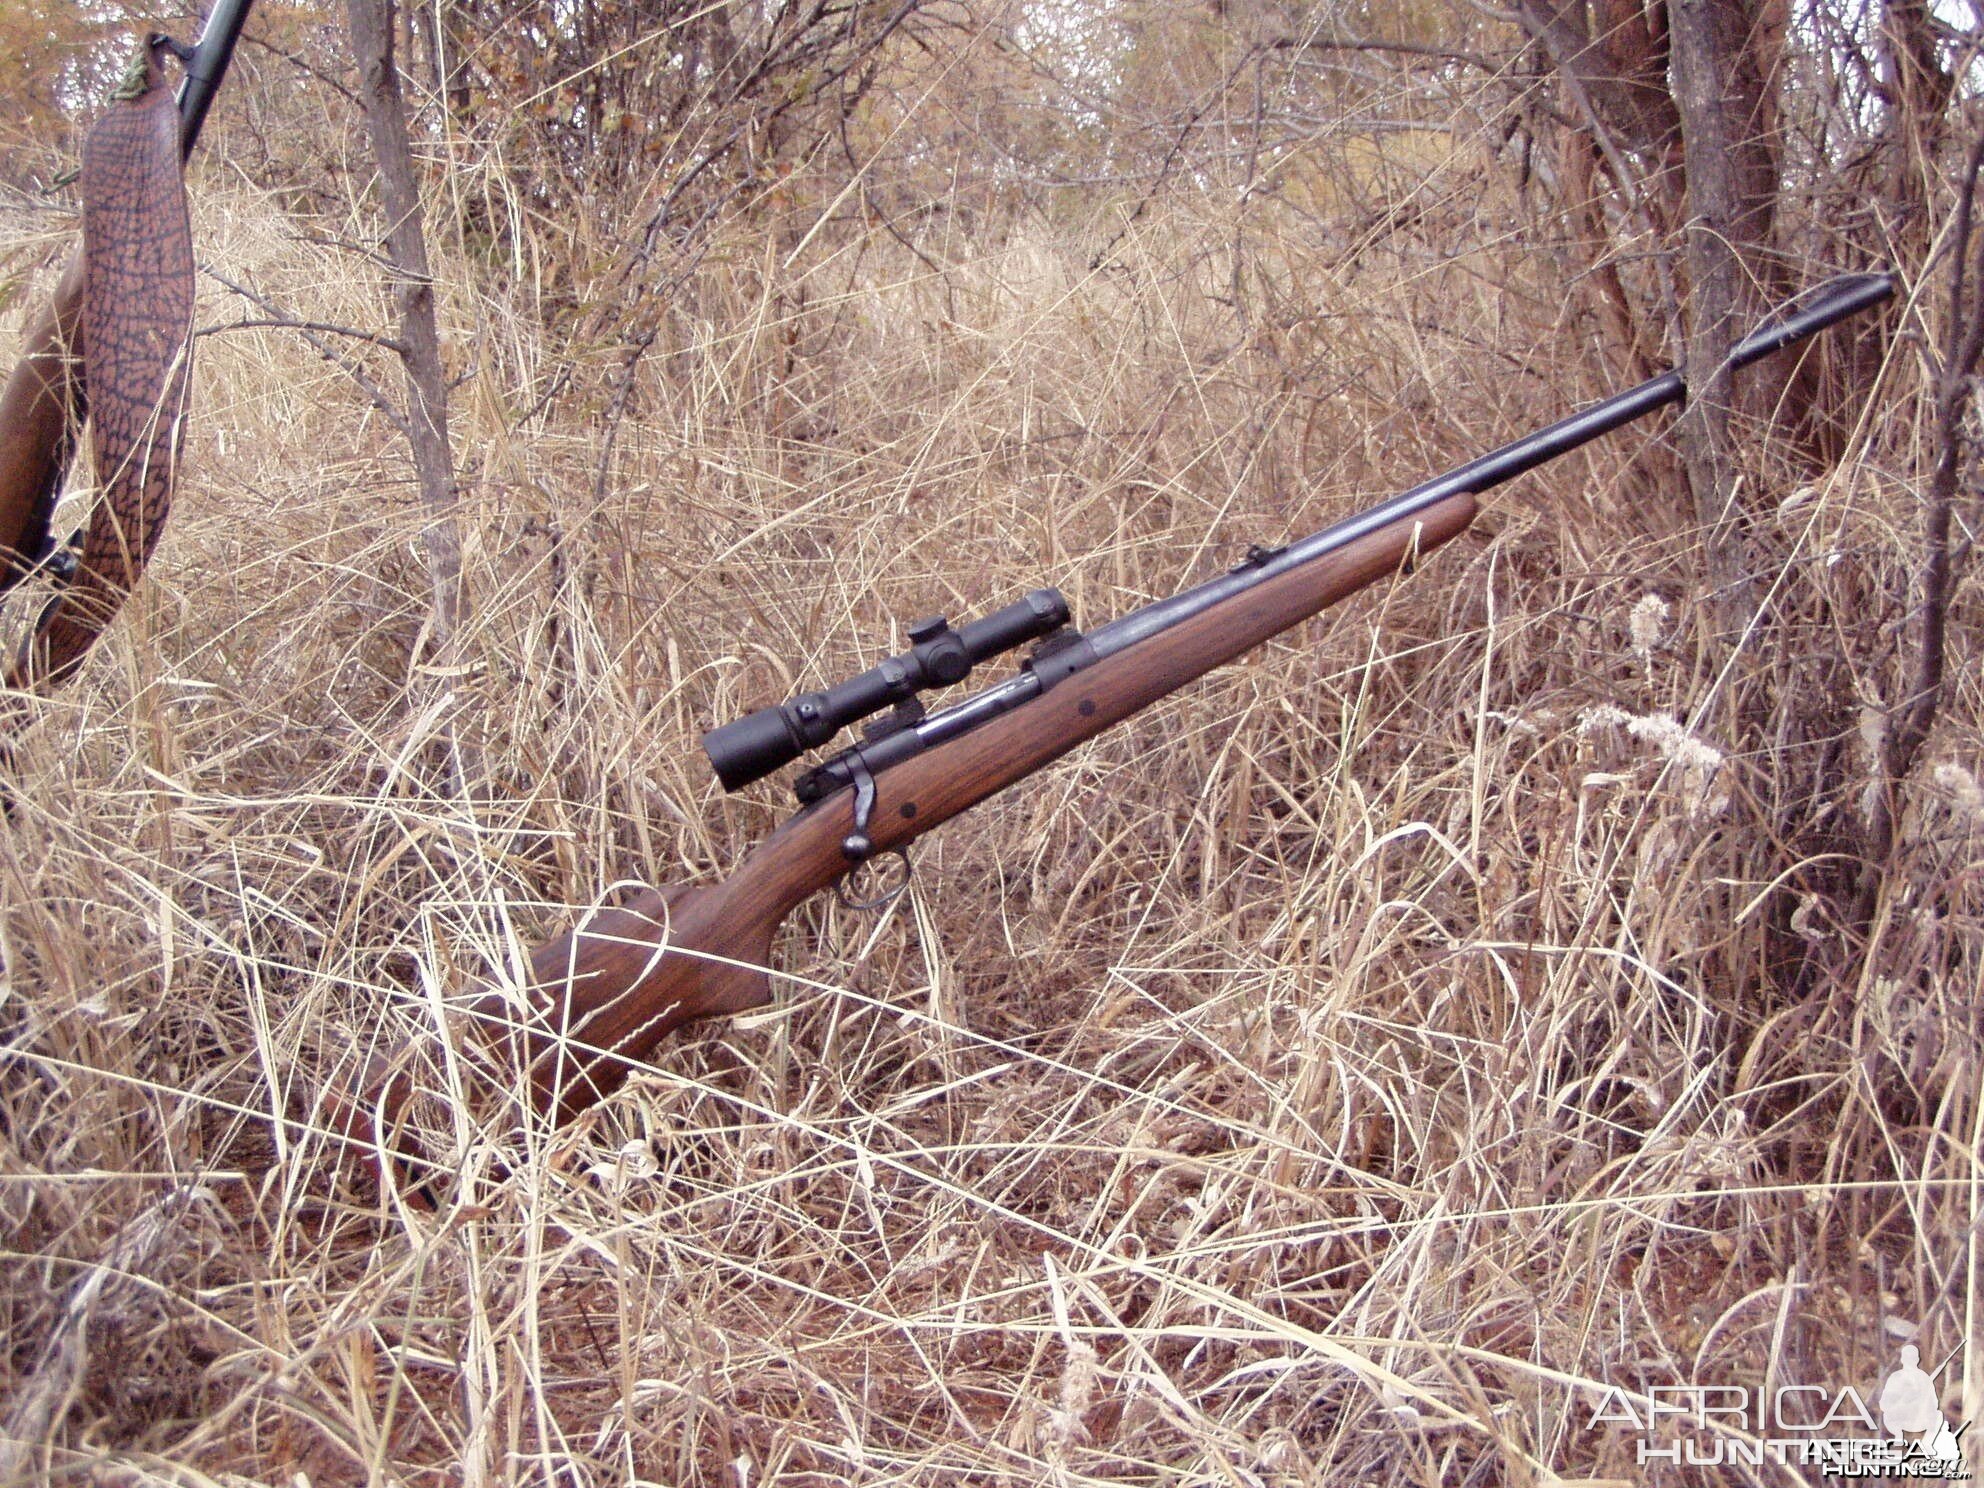 Winchetsre 70 pre-64 from 1958 with Leupold 1-5x20